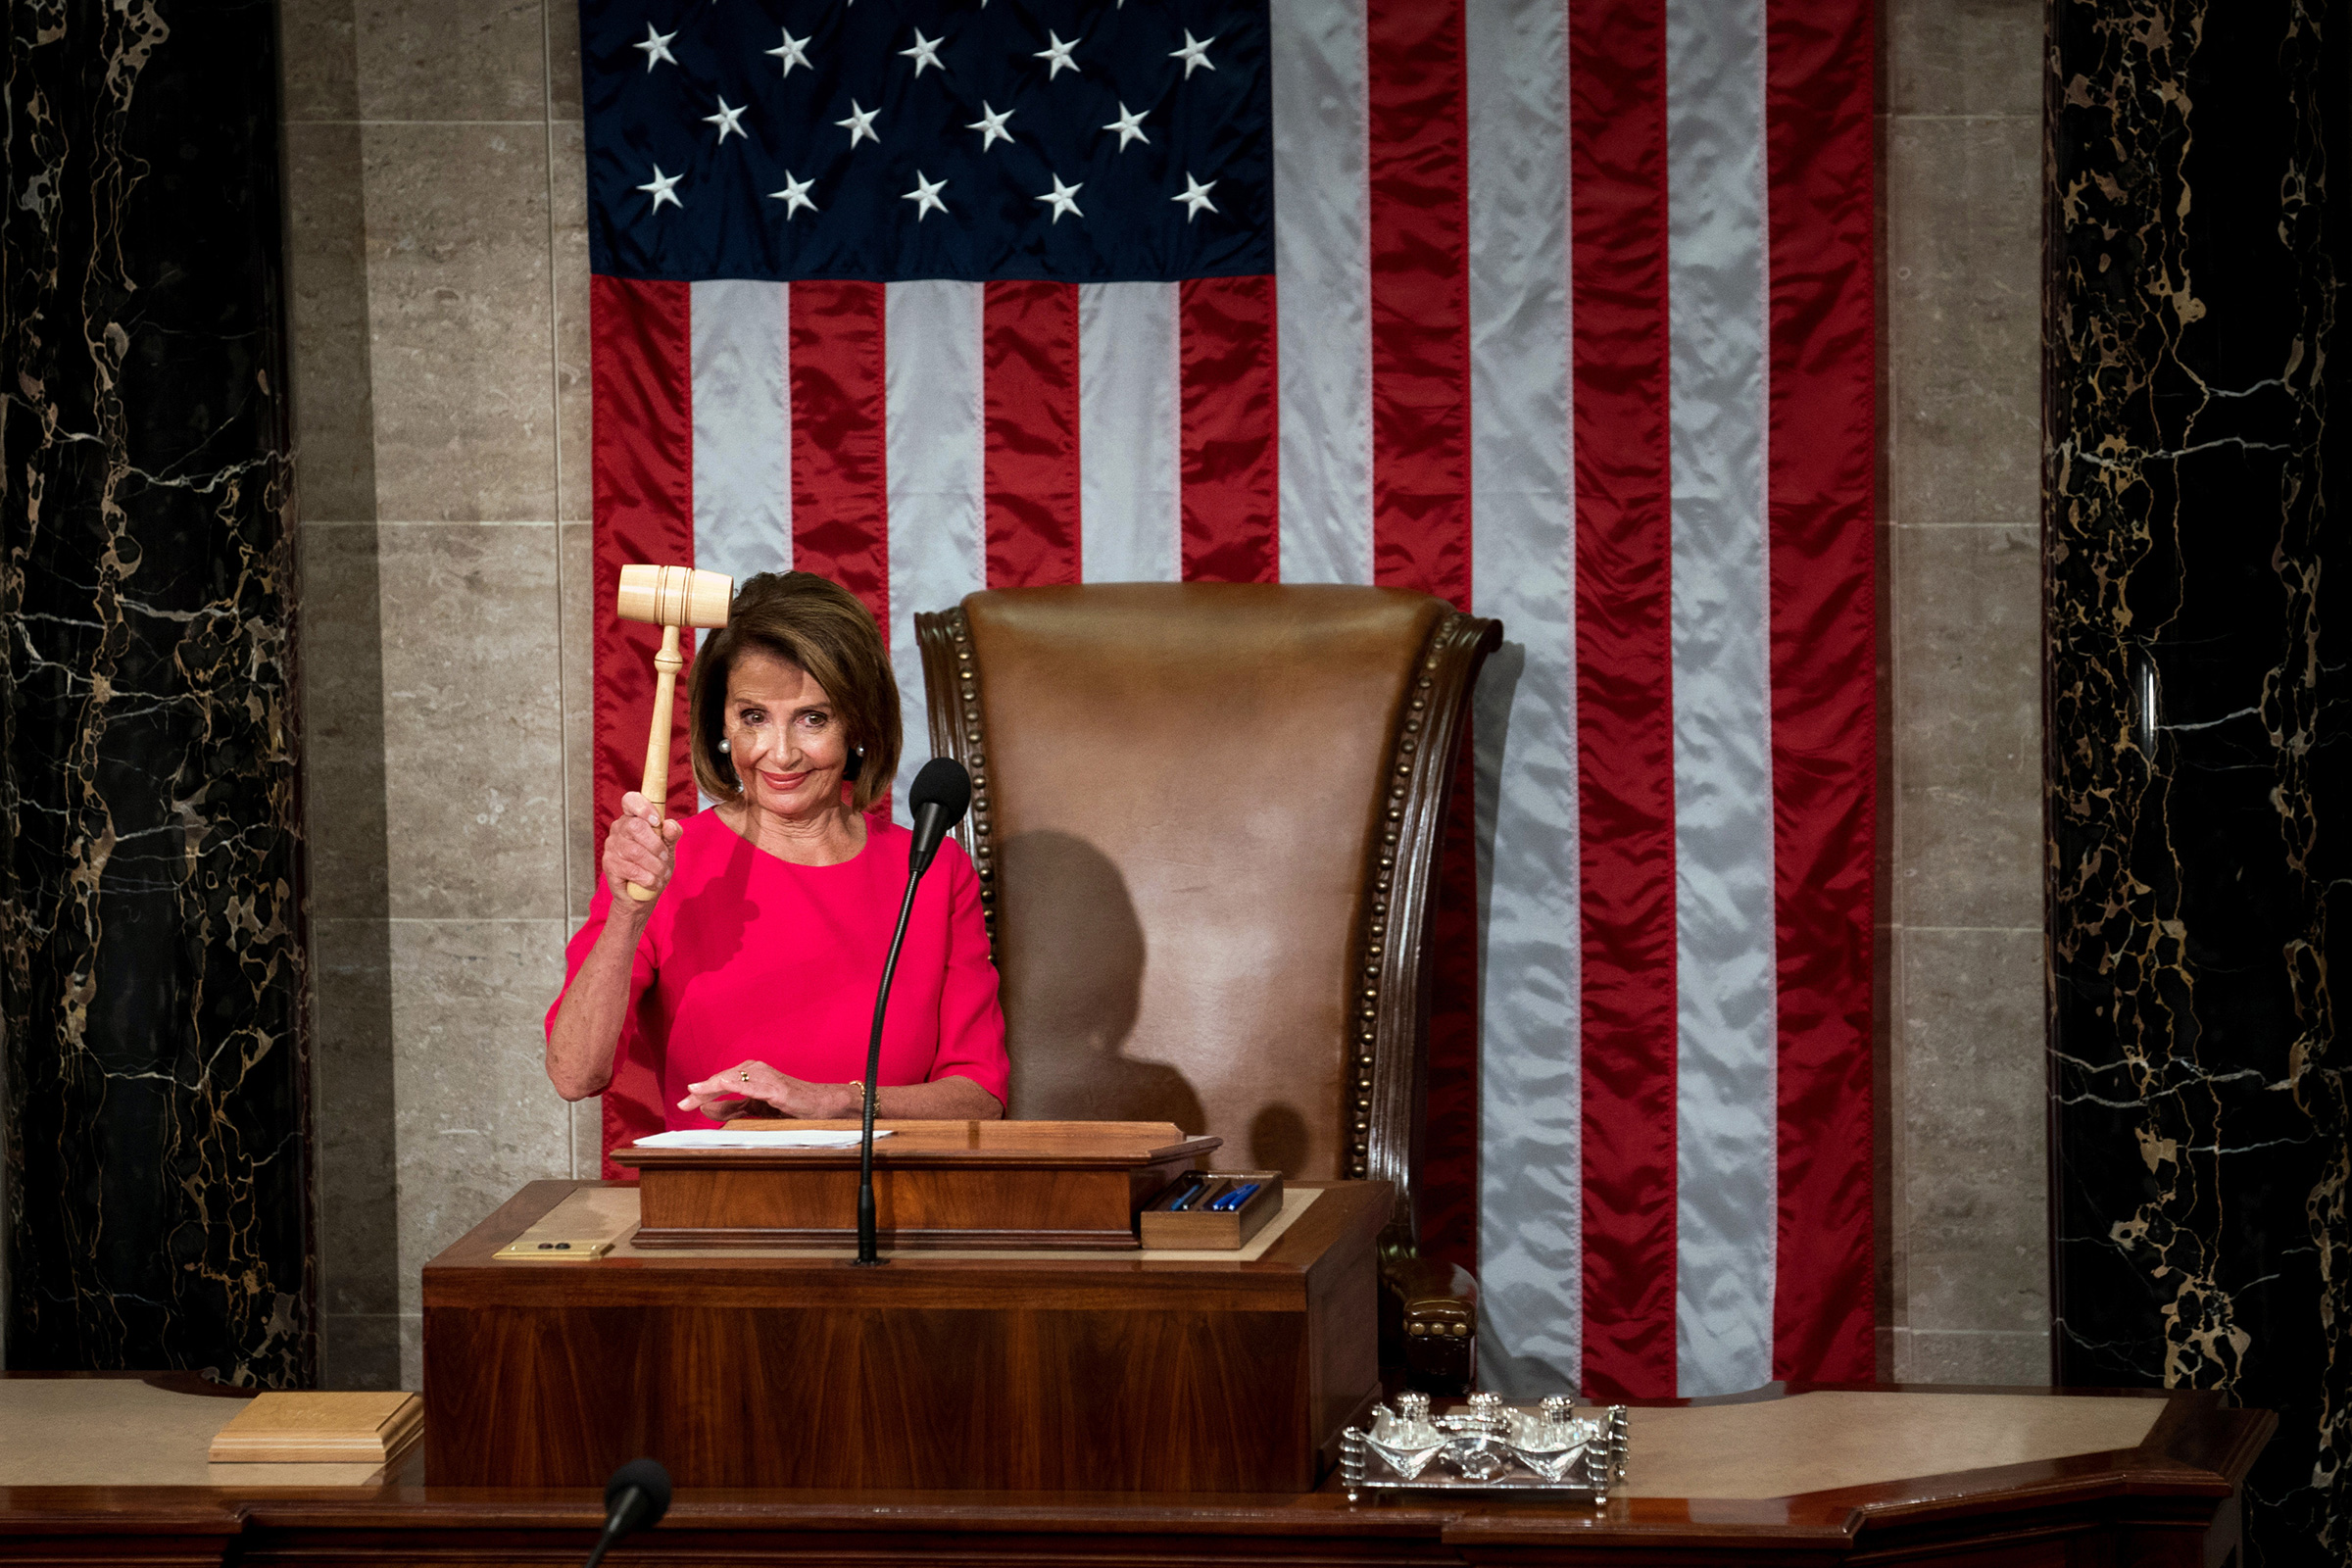 Rep. Nancy Pelosi wields the gavel after her election as Speaker of the House at the Capitol in Washington, D.C. on Jan. 3, 2019.